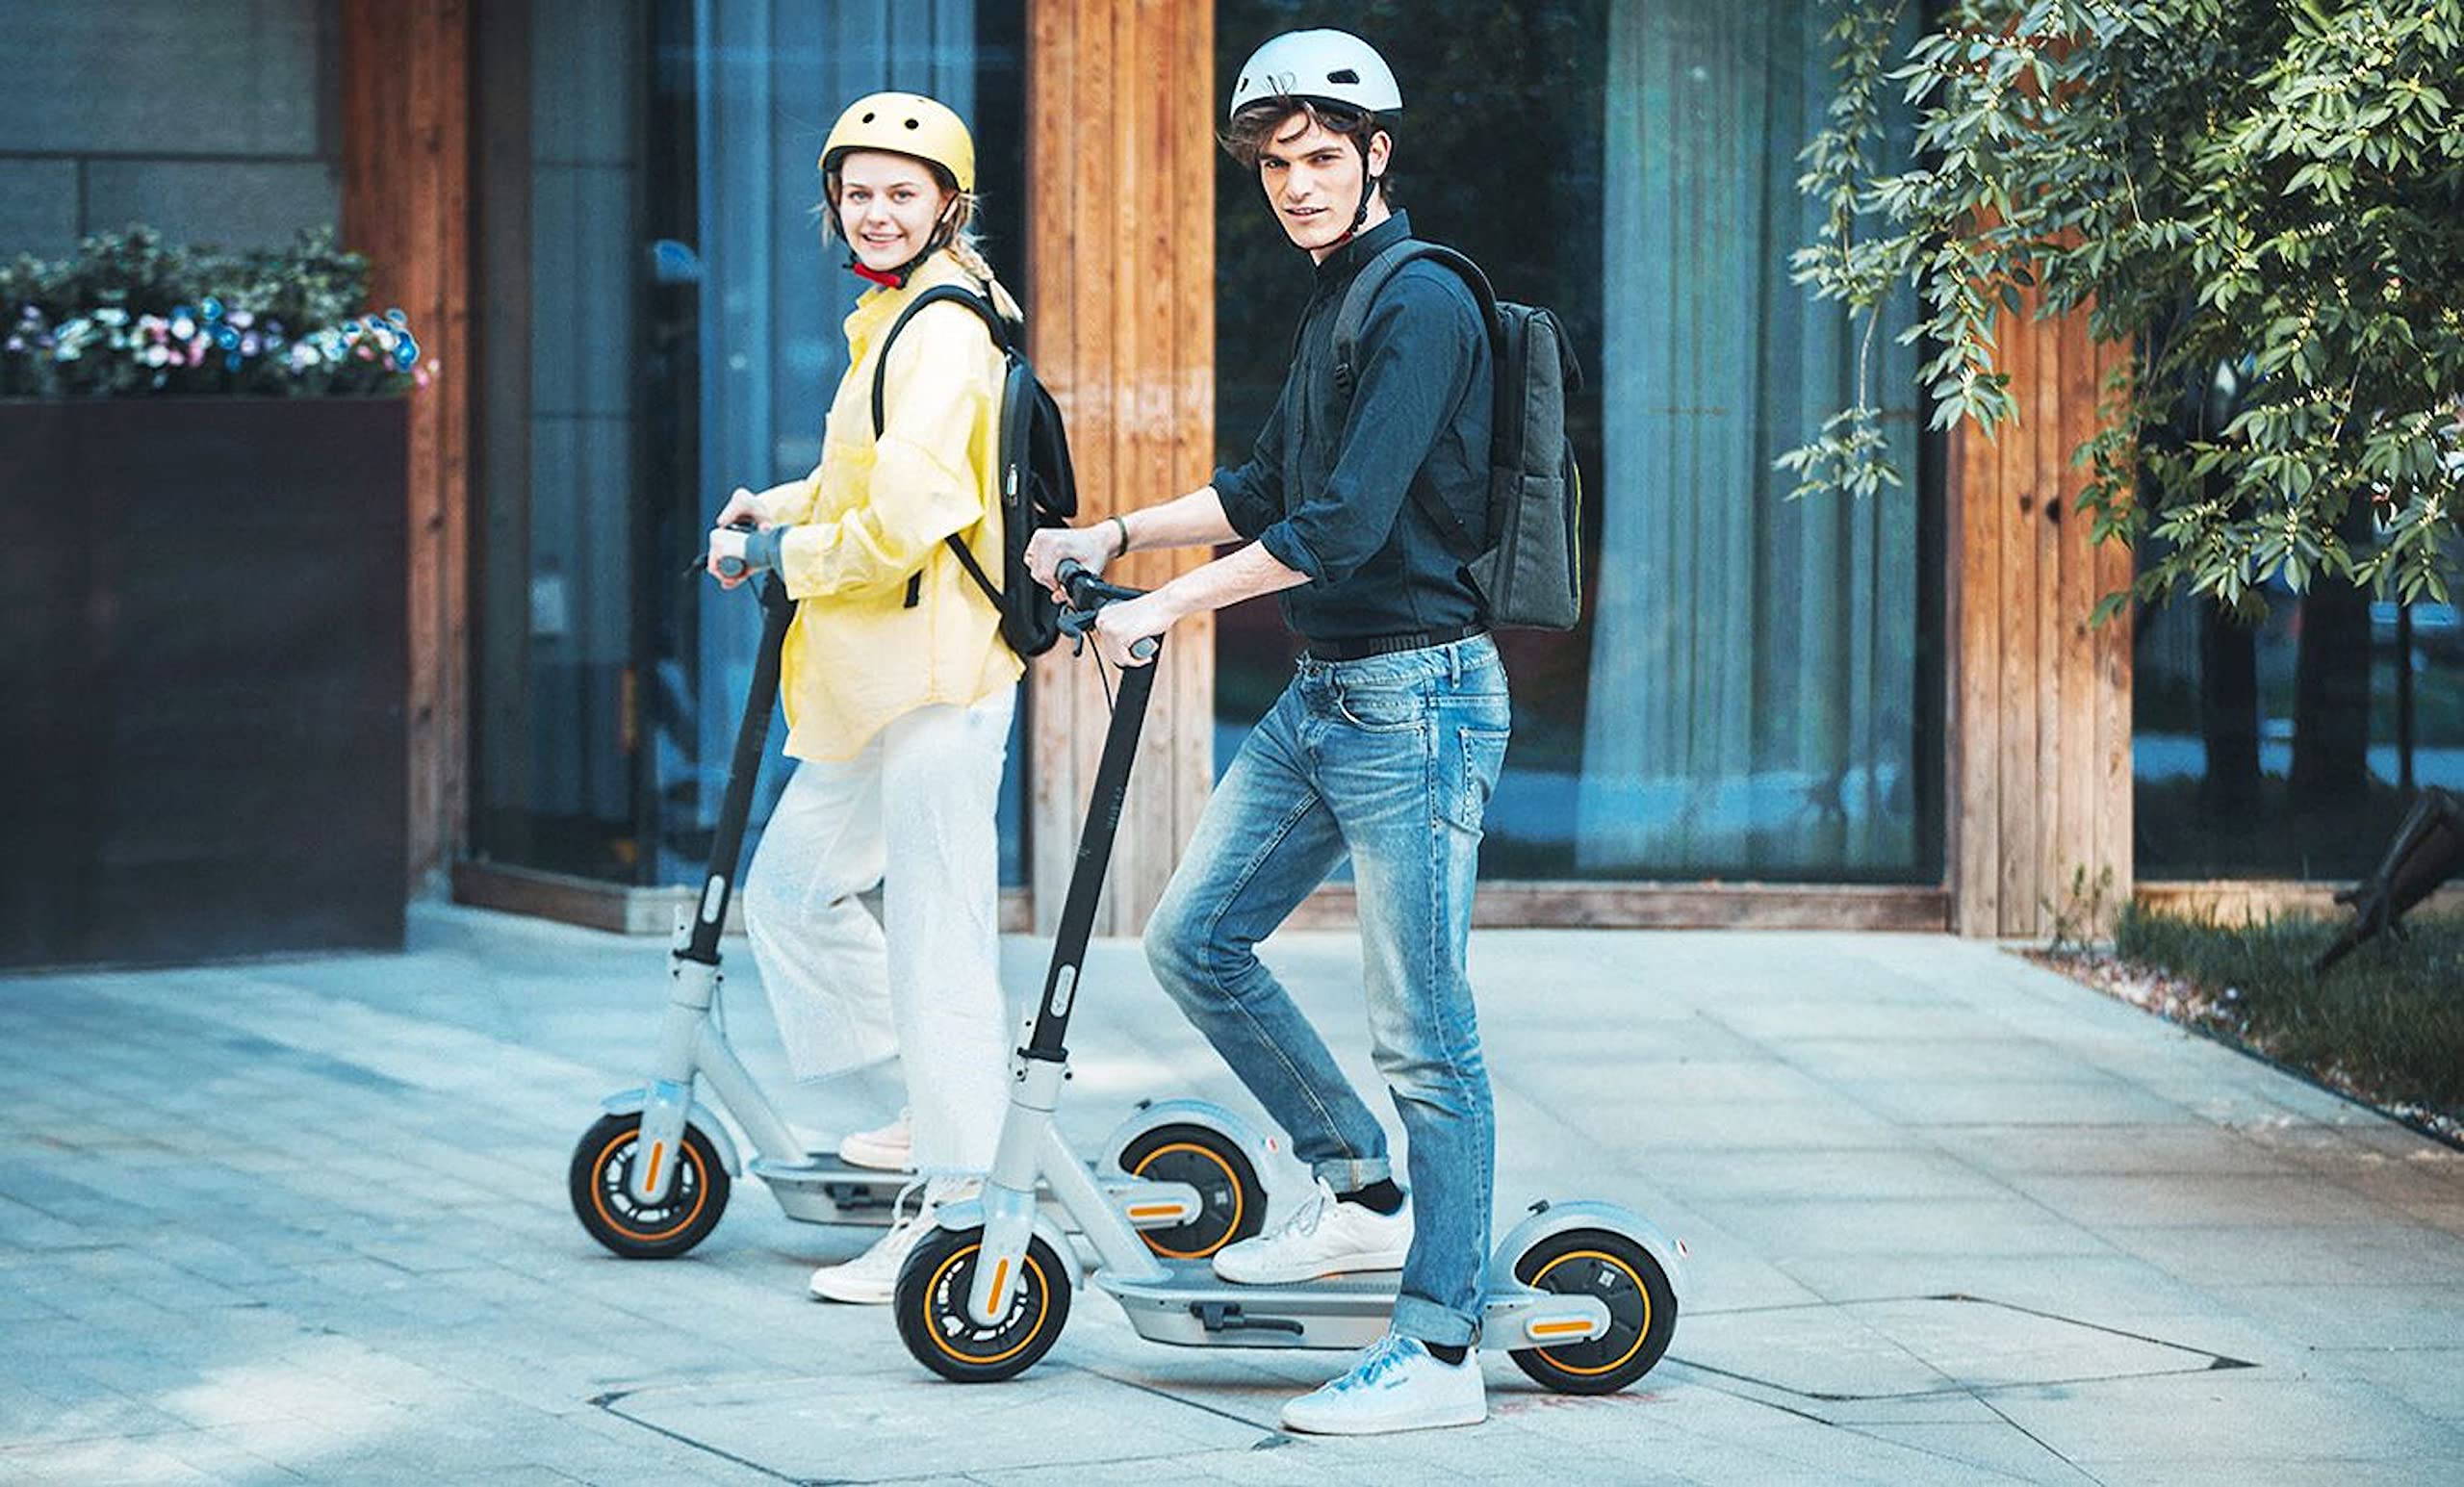 Ninebot max g30lp kickscooter by segway - certified factory refurbished-EZbike Canada